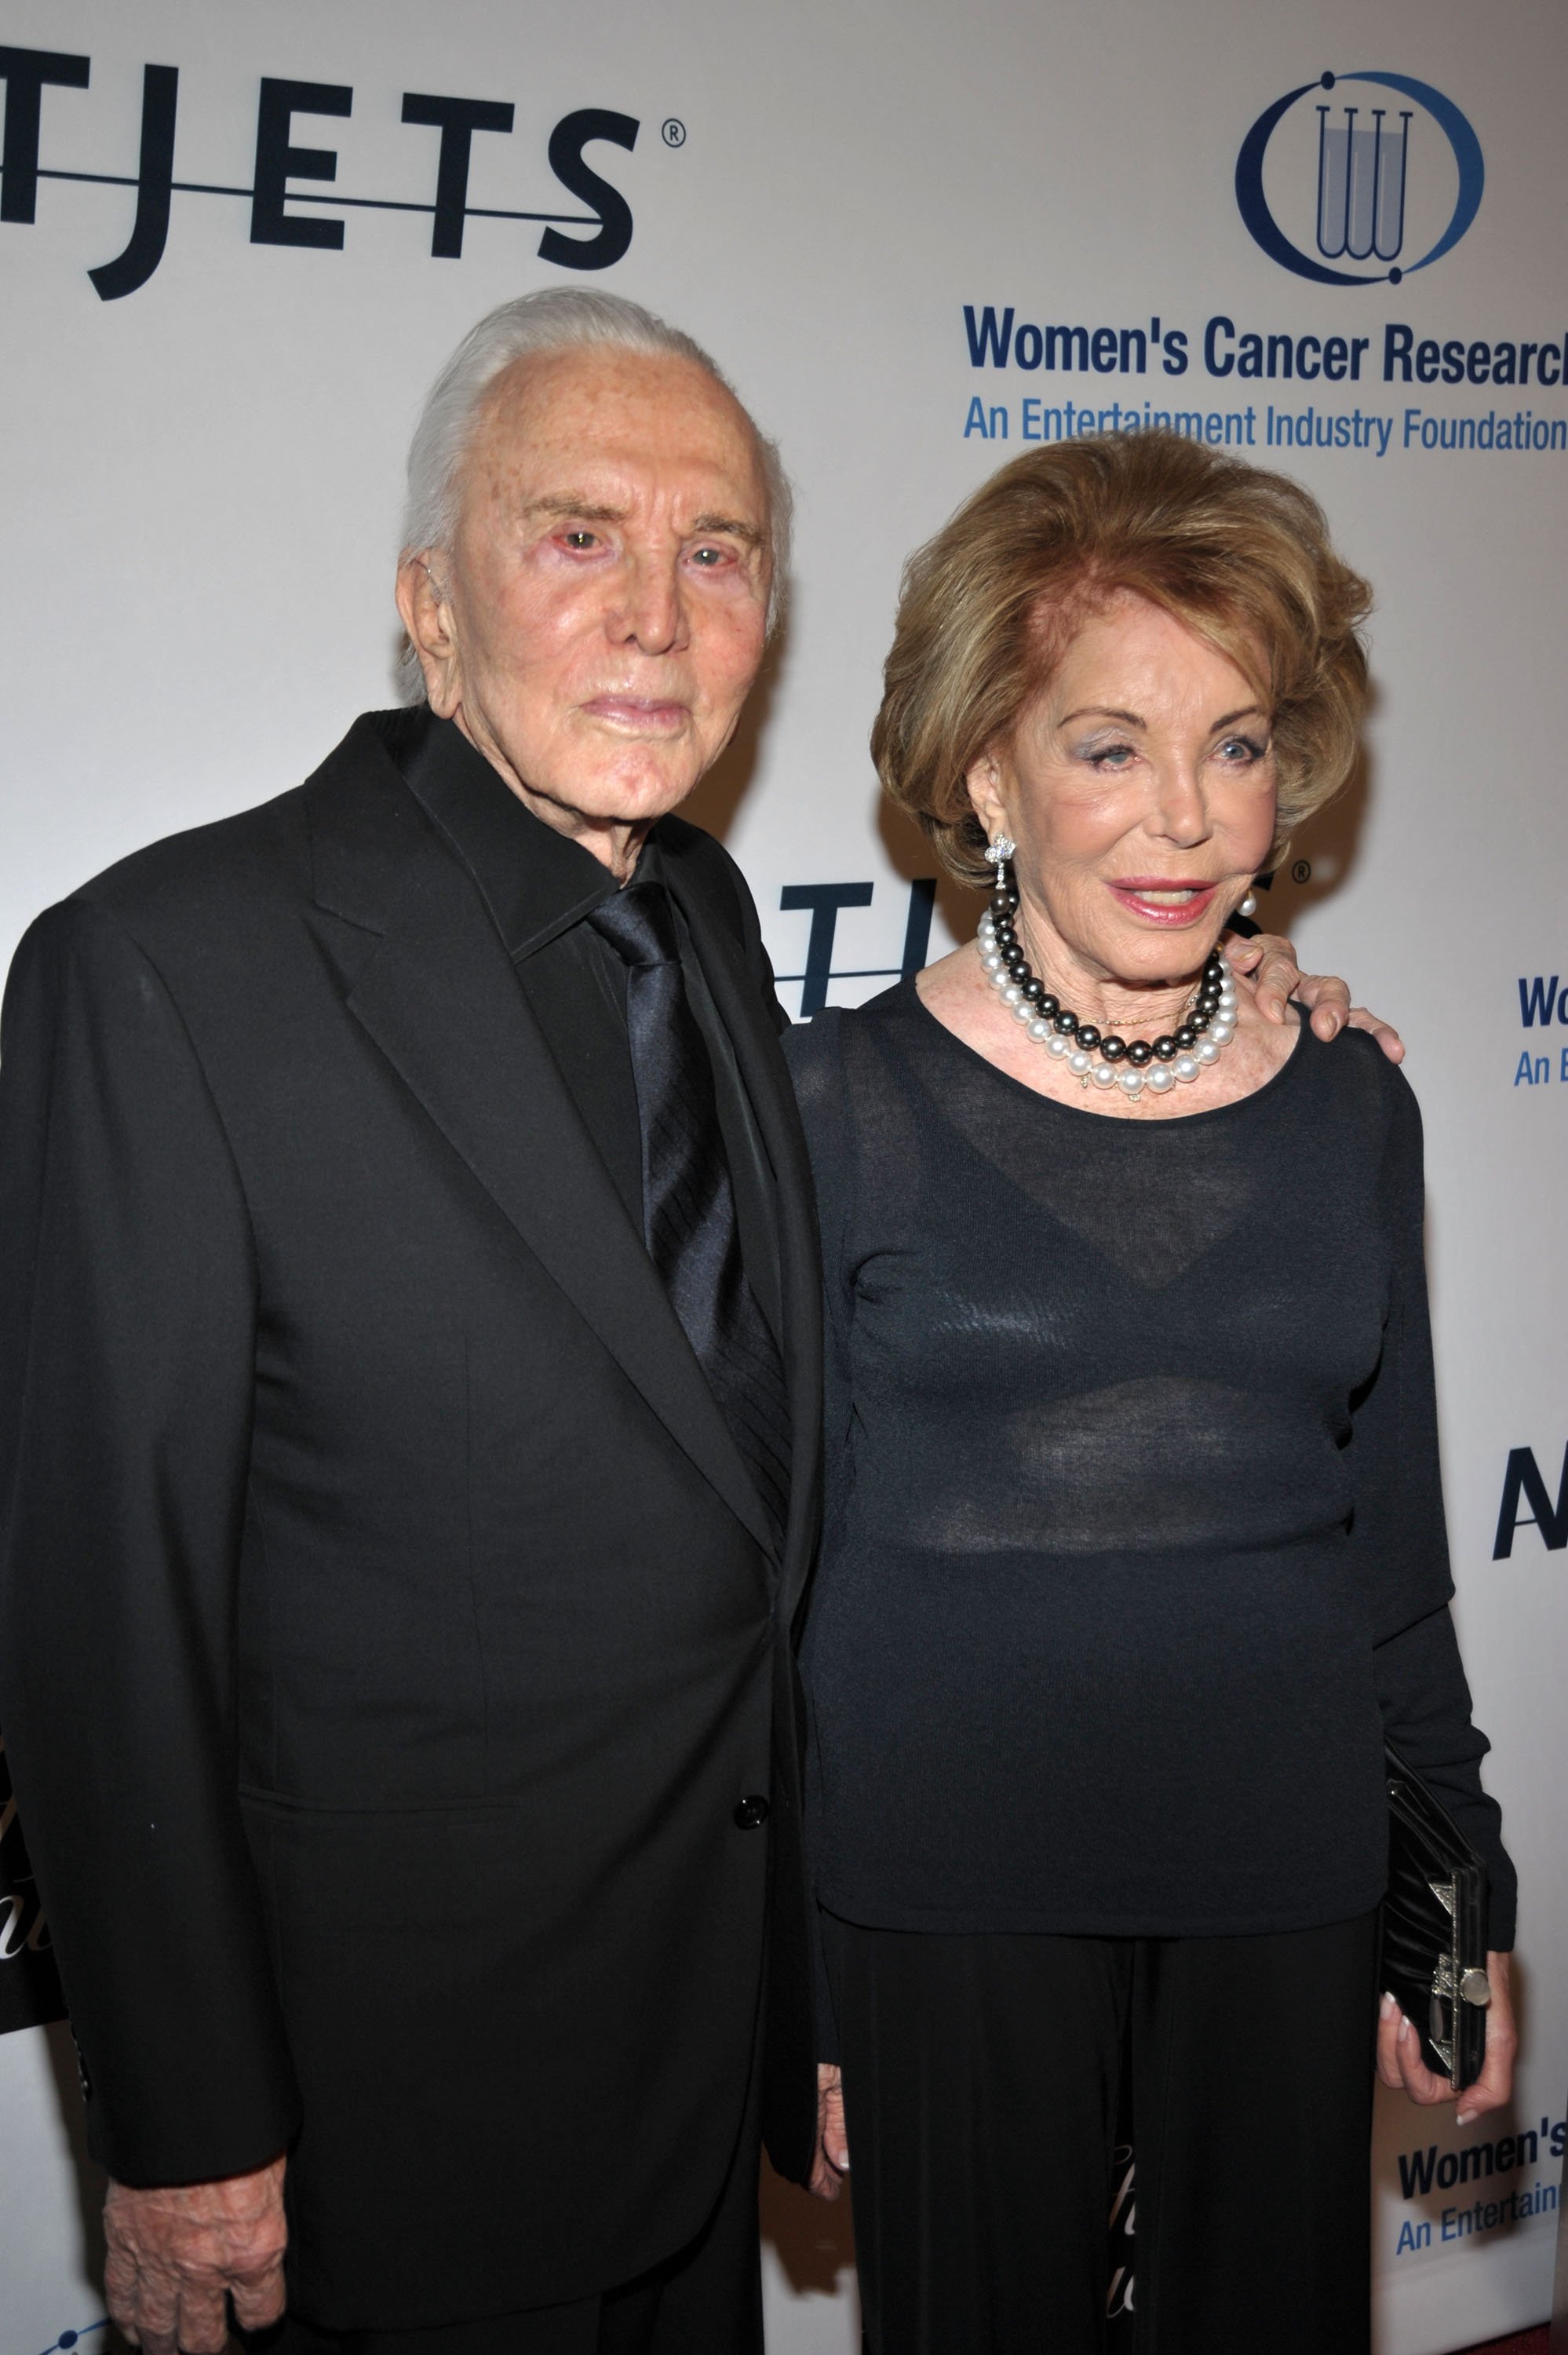 Kirk Douglas and wife Anne Buydens arriving at the 13th annual Unforgettable Evening at Beverly Wilshire Four Seasons Hotel on January 27, 2010 in Beverly Hills, California. / Source: Getty Images